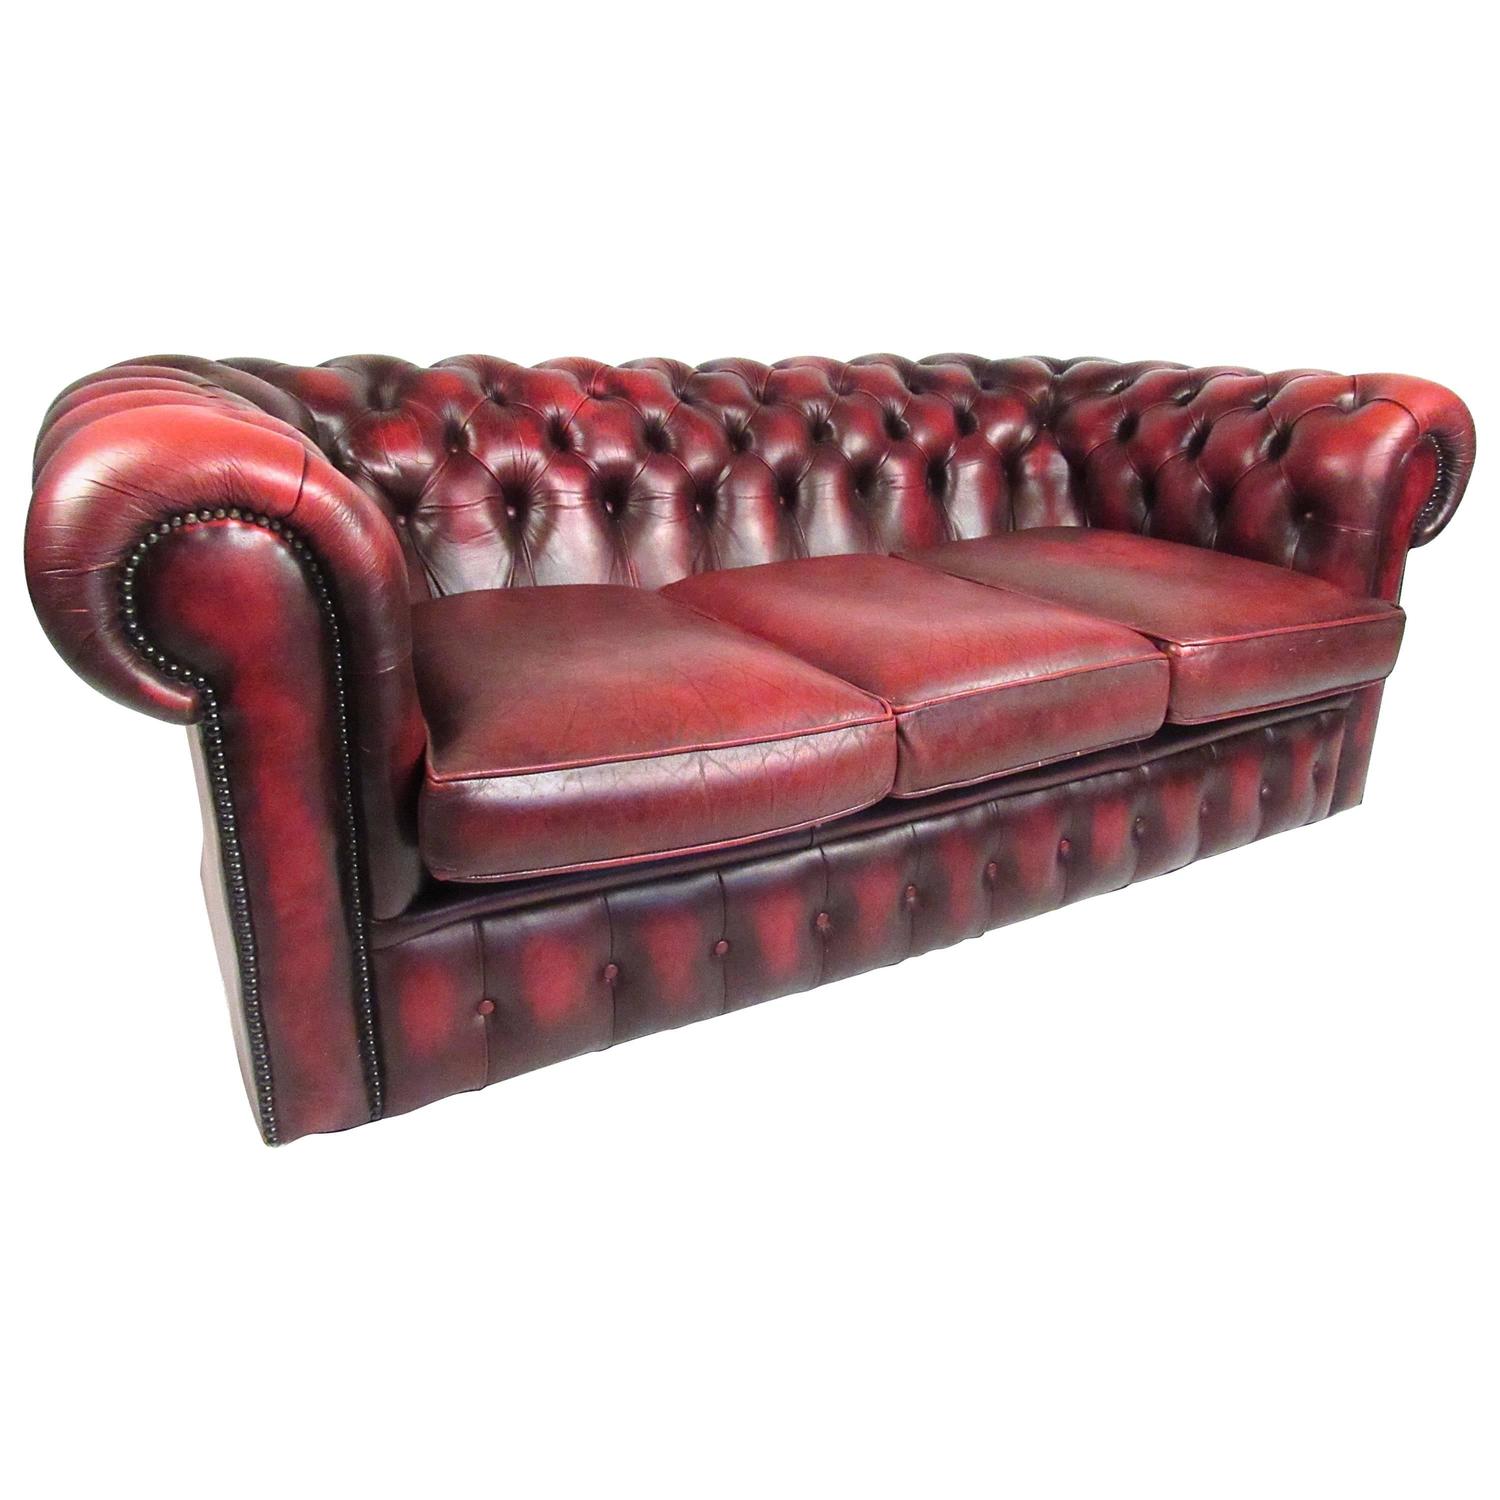 Vintage Red Leather Chesterfield Sofa For Sale at 1stdibs